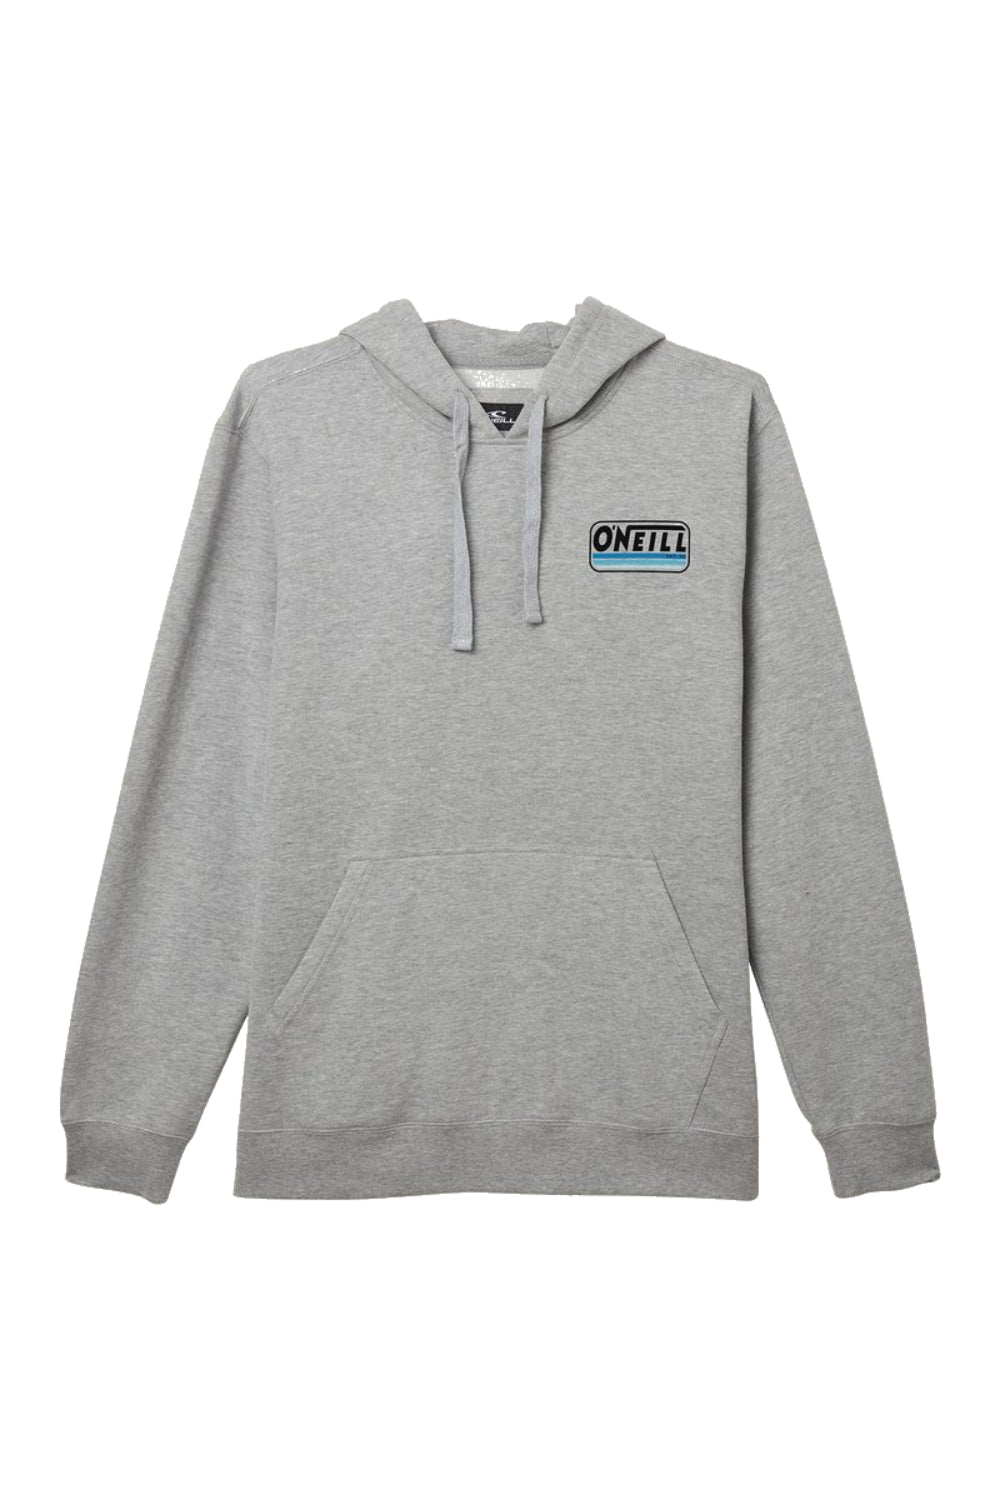 Oneill Fifty Two Pullover Fleece HGR S